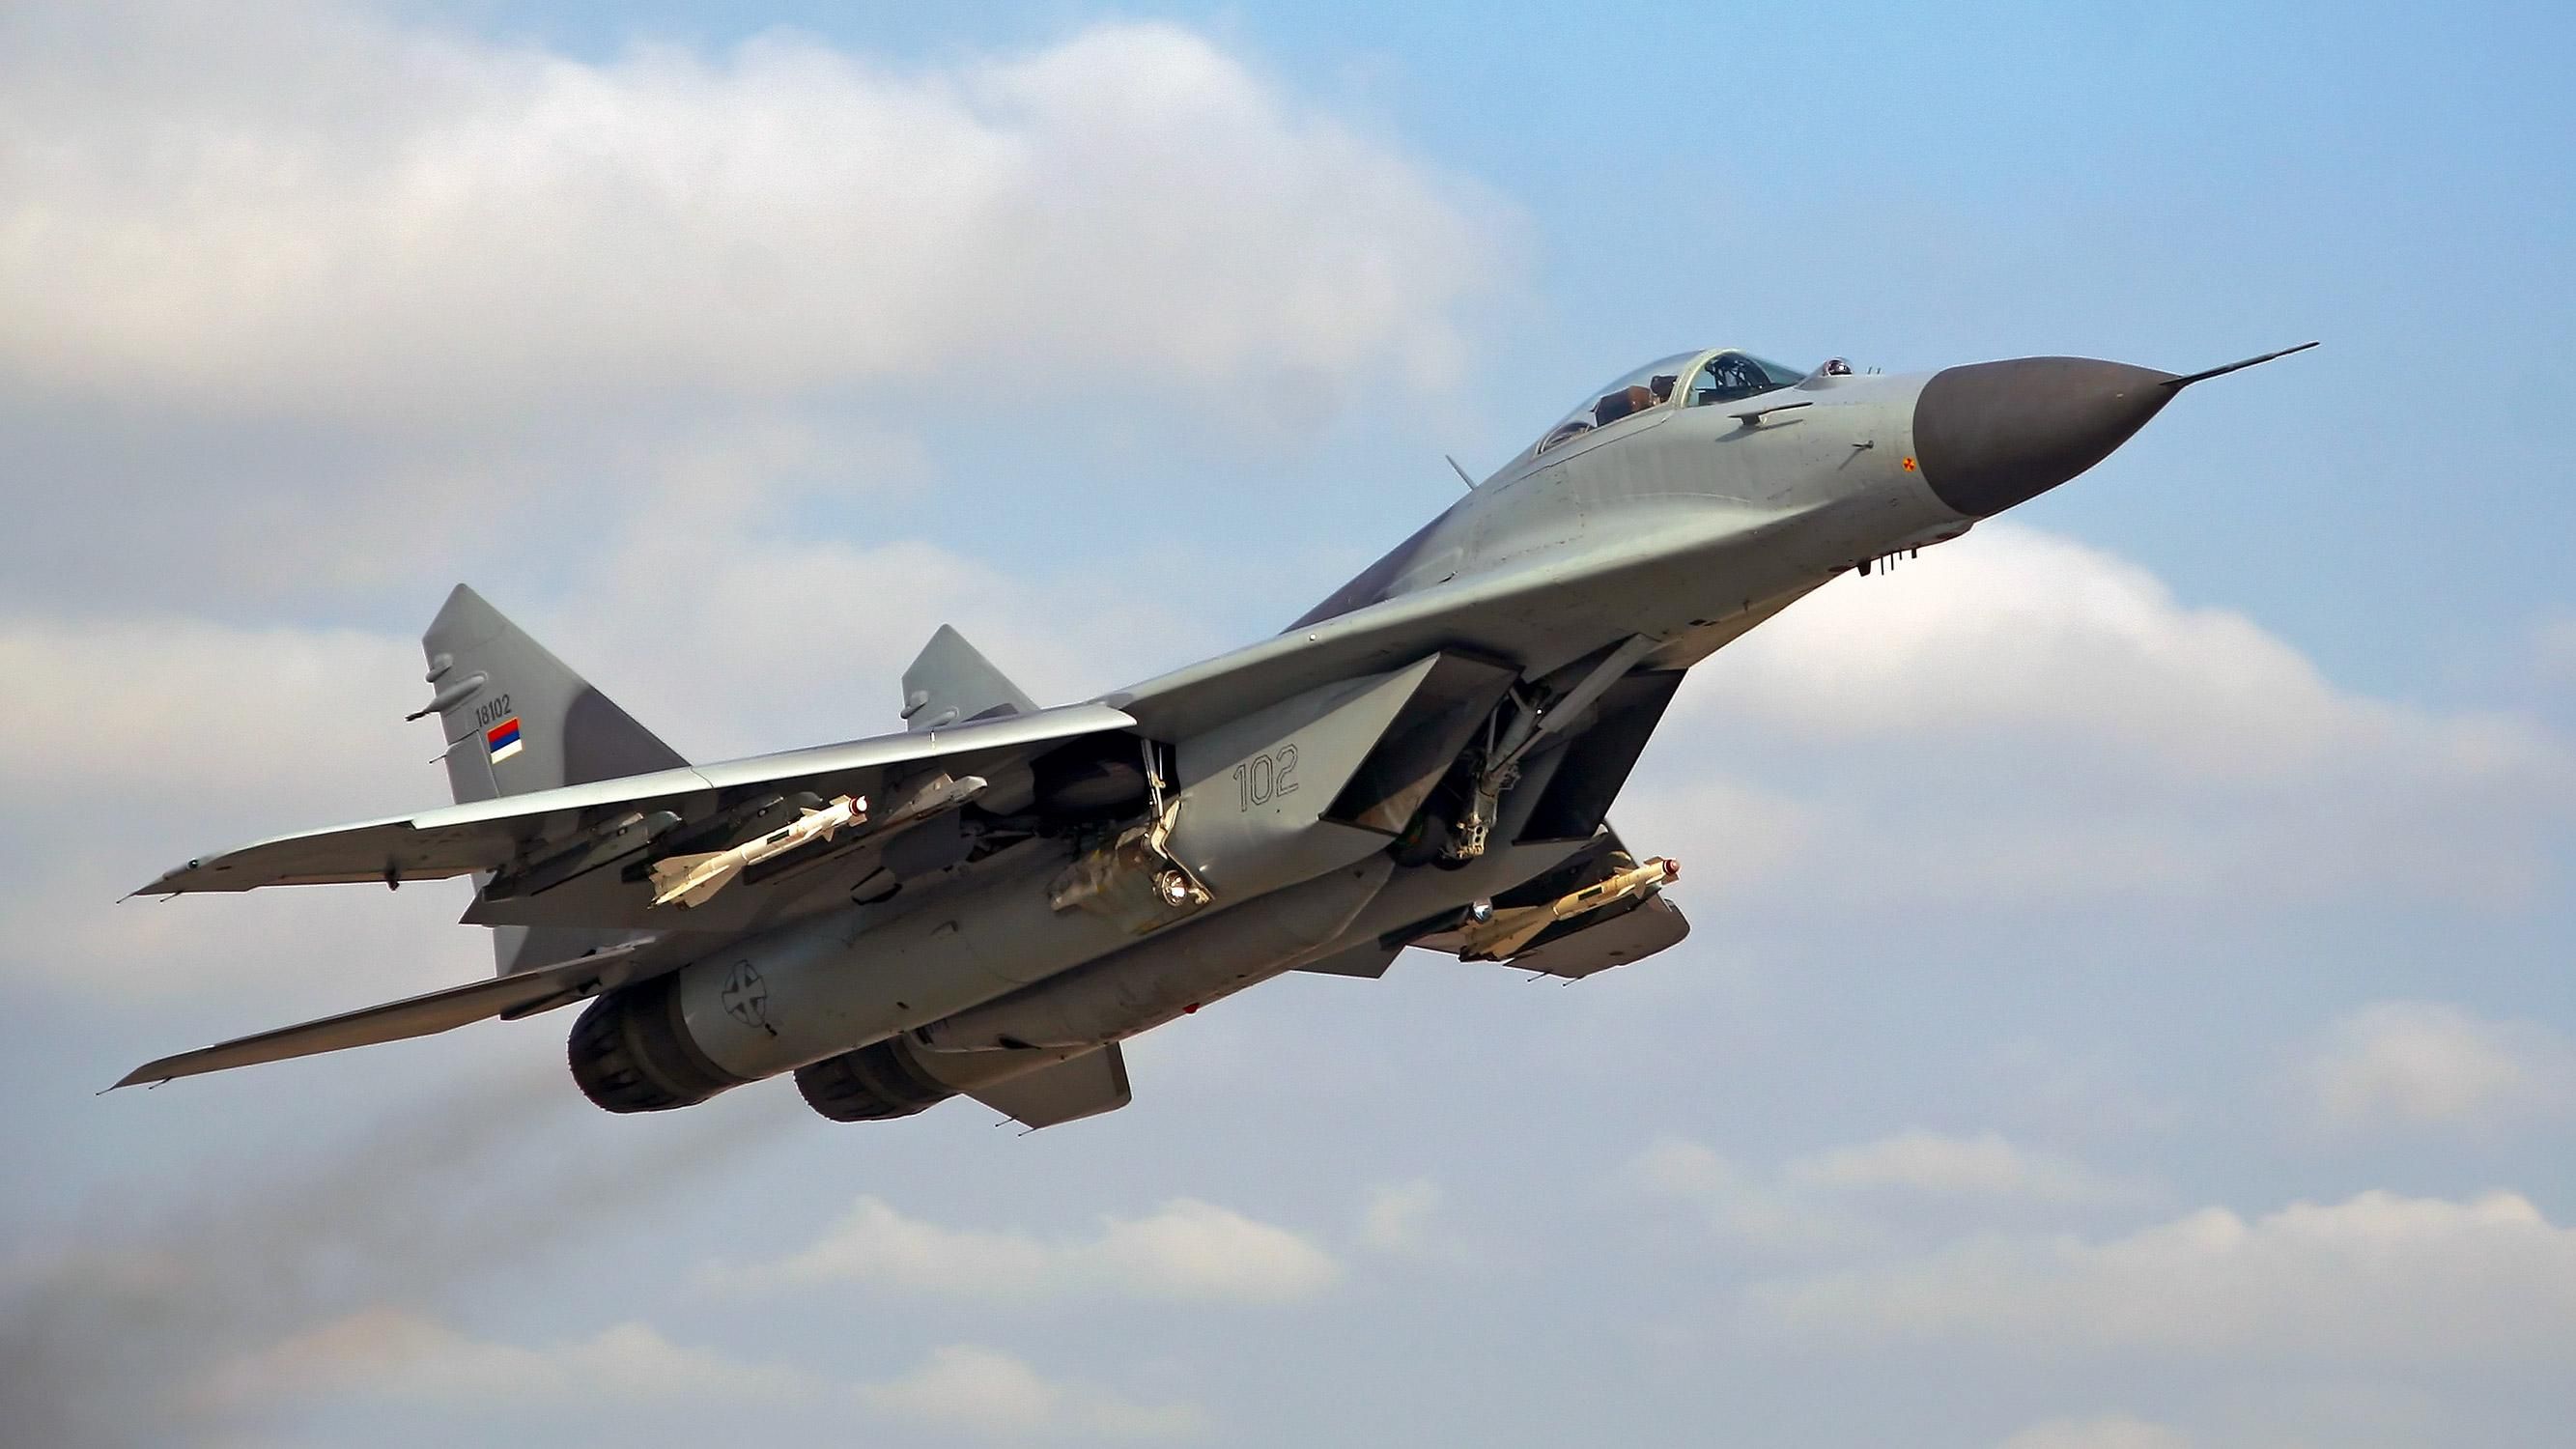 Poland is ready to hand over its MiG-29 fighter jets to Ukraine - en